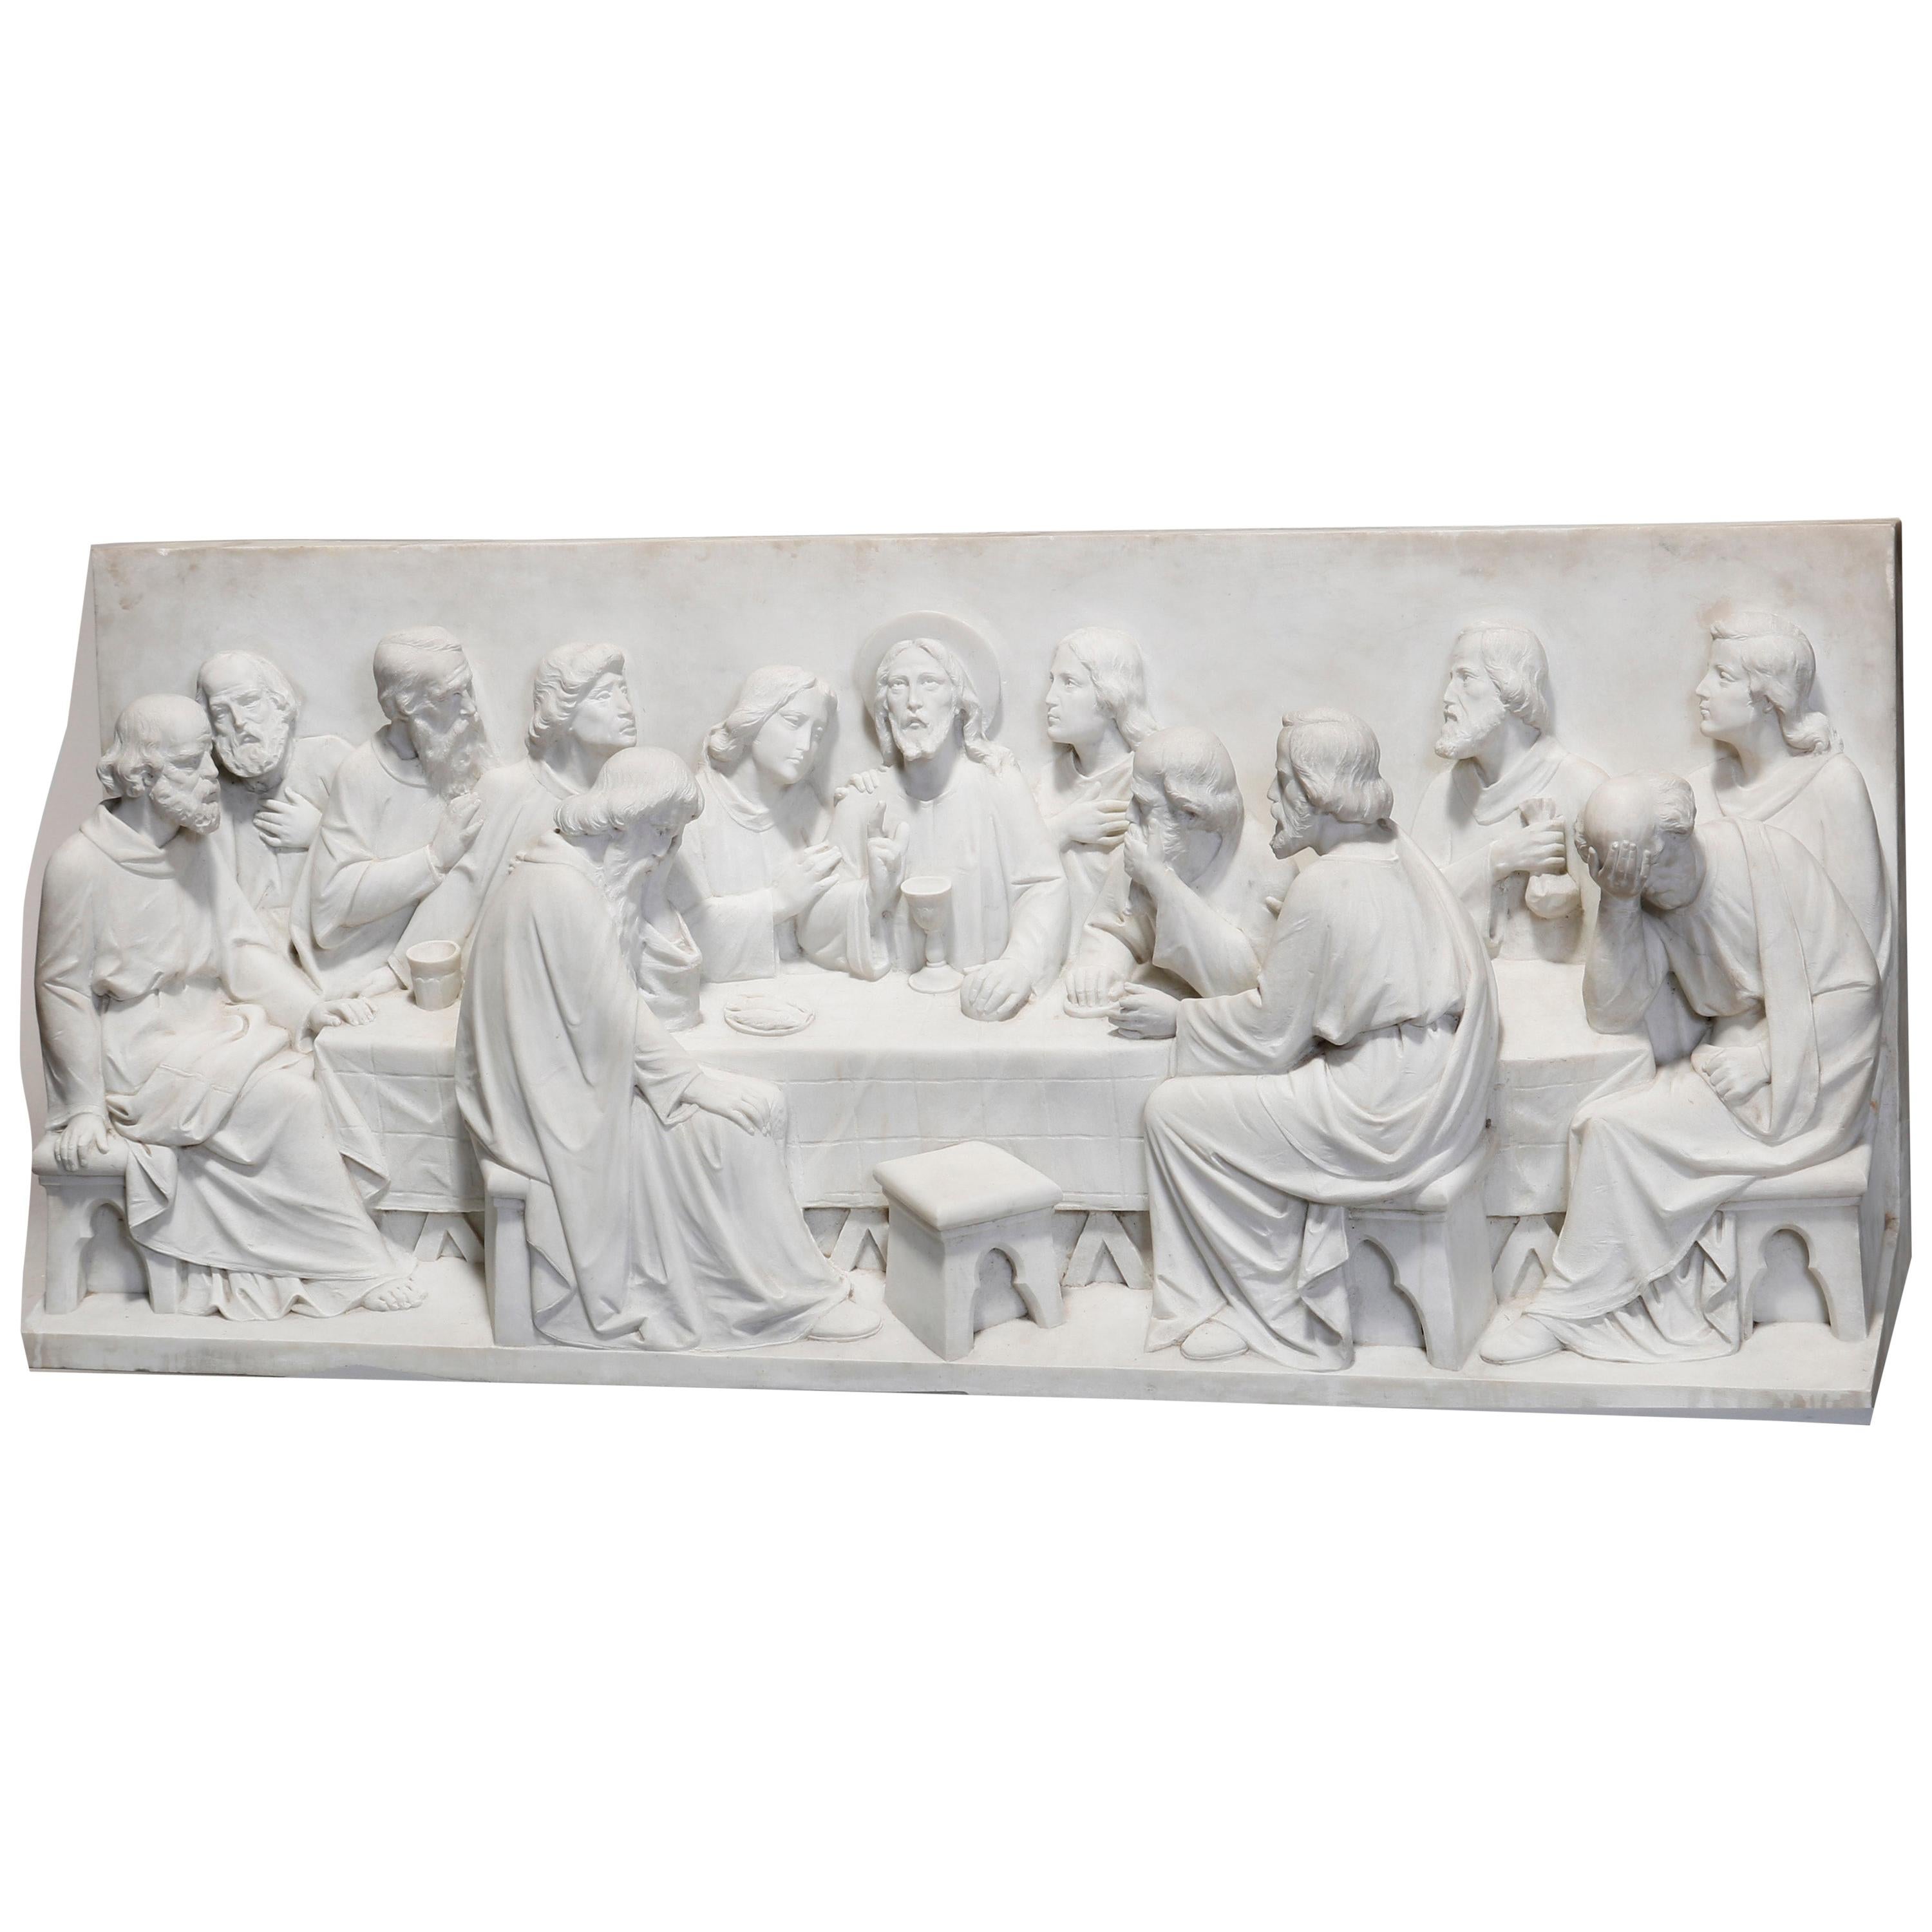 Monumental Italian Carved 3-D Sculptural Plaque of the Last Supper, c1910